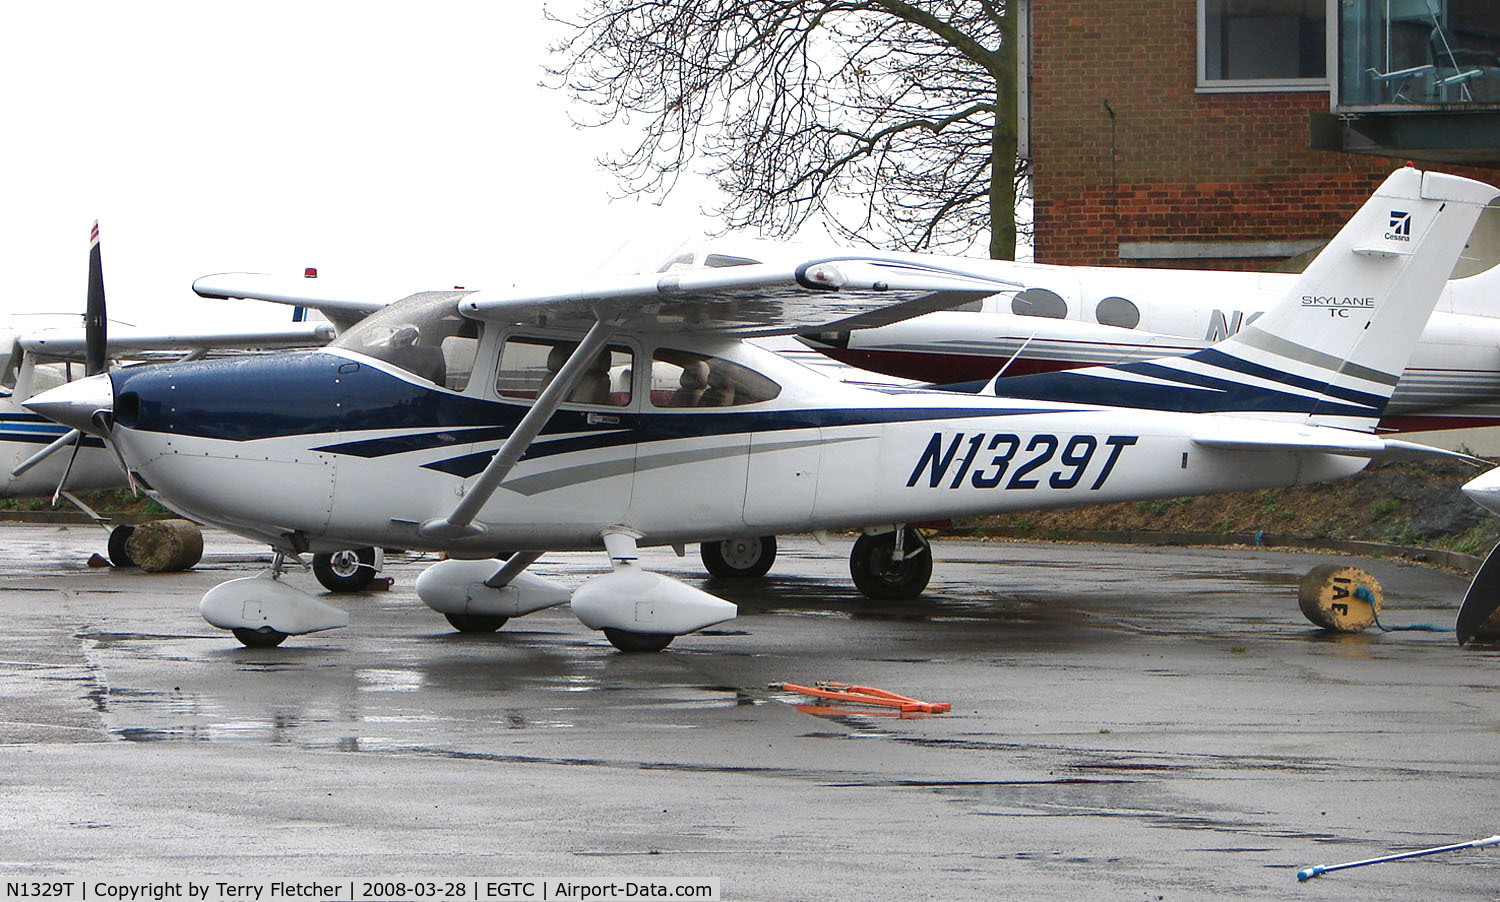 N1329T, 2006 Cessna T182T Turbo Skylane C/N T18208667, Visitor to Cranfield in March 2008